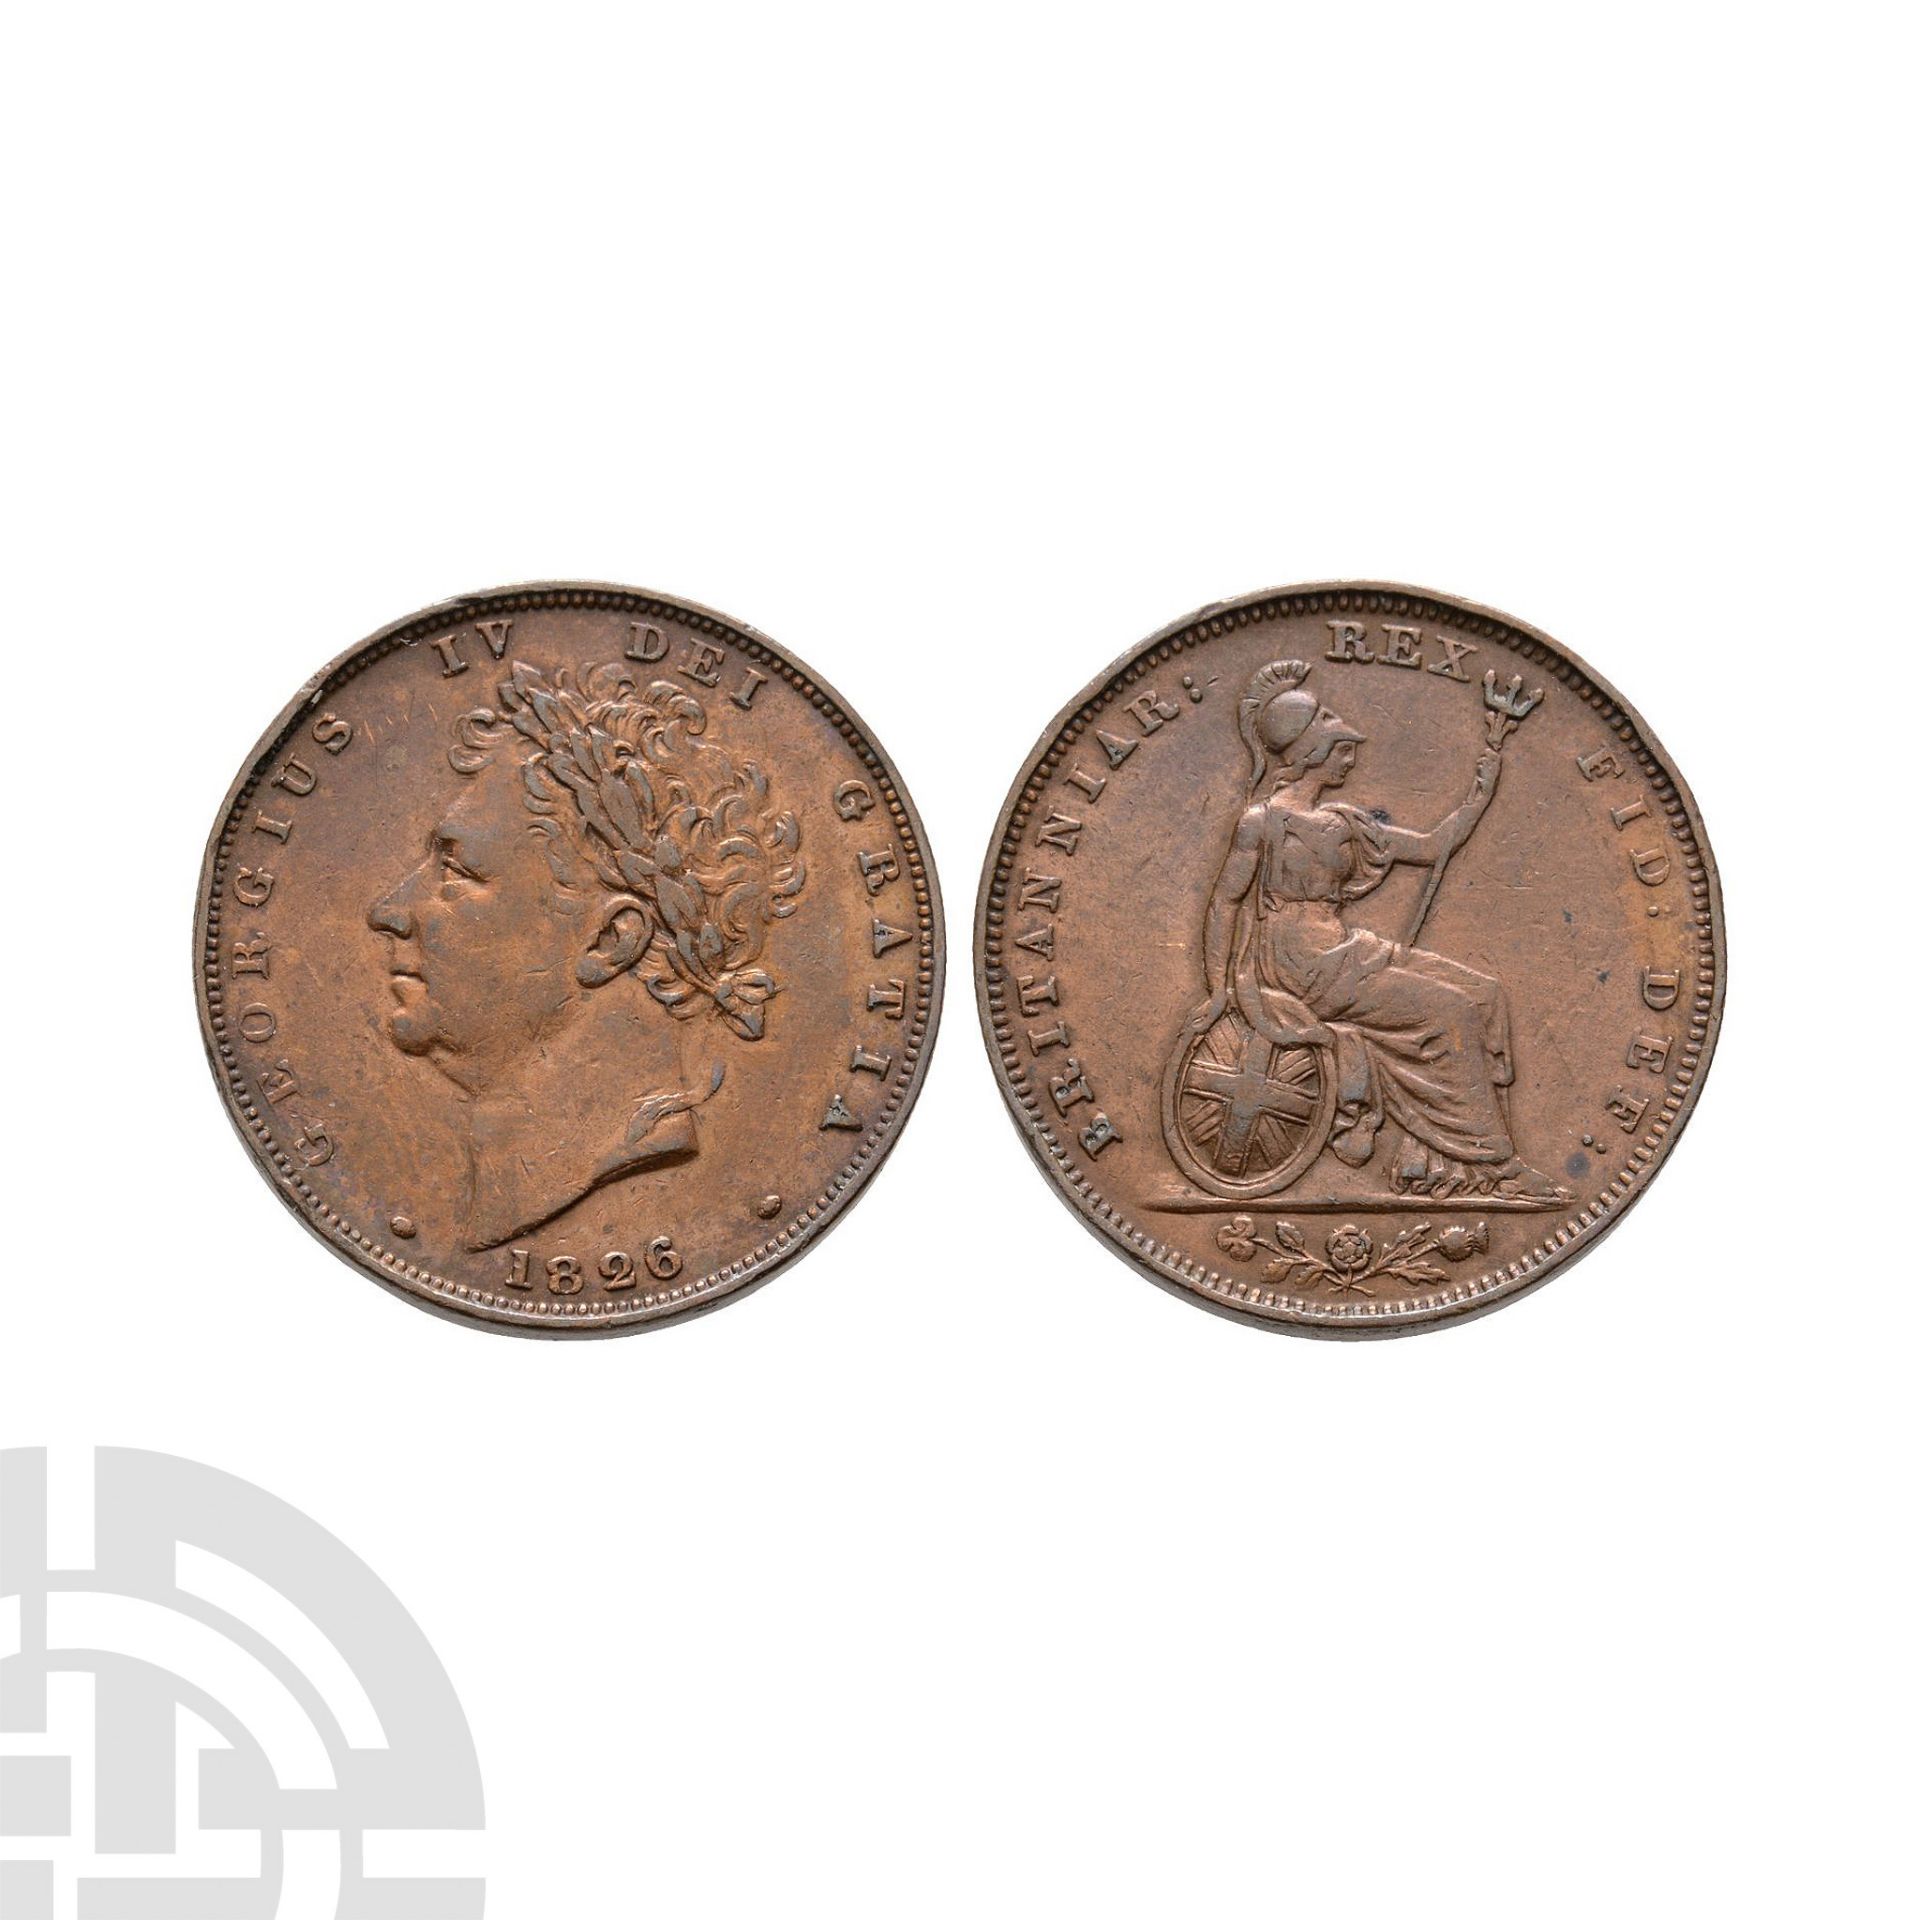 English Milled Coins - George IV - 1826 - AE Farthing